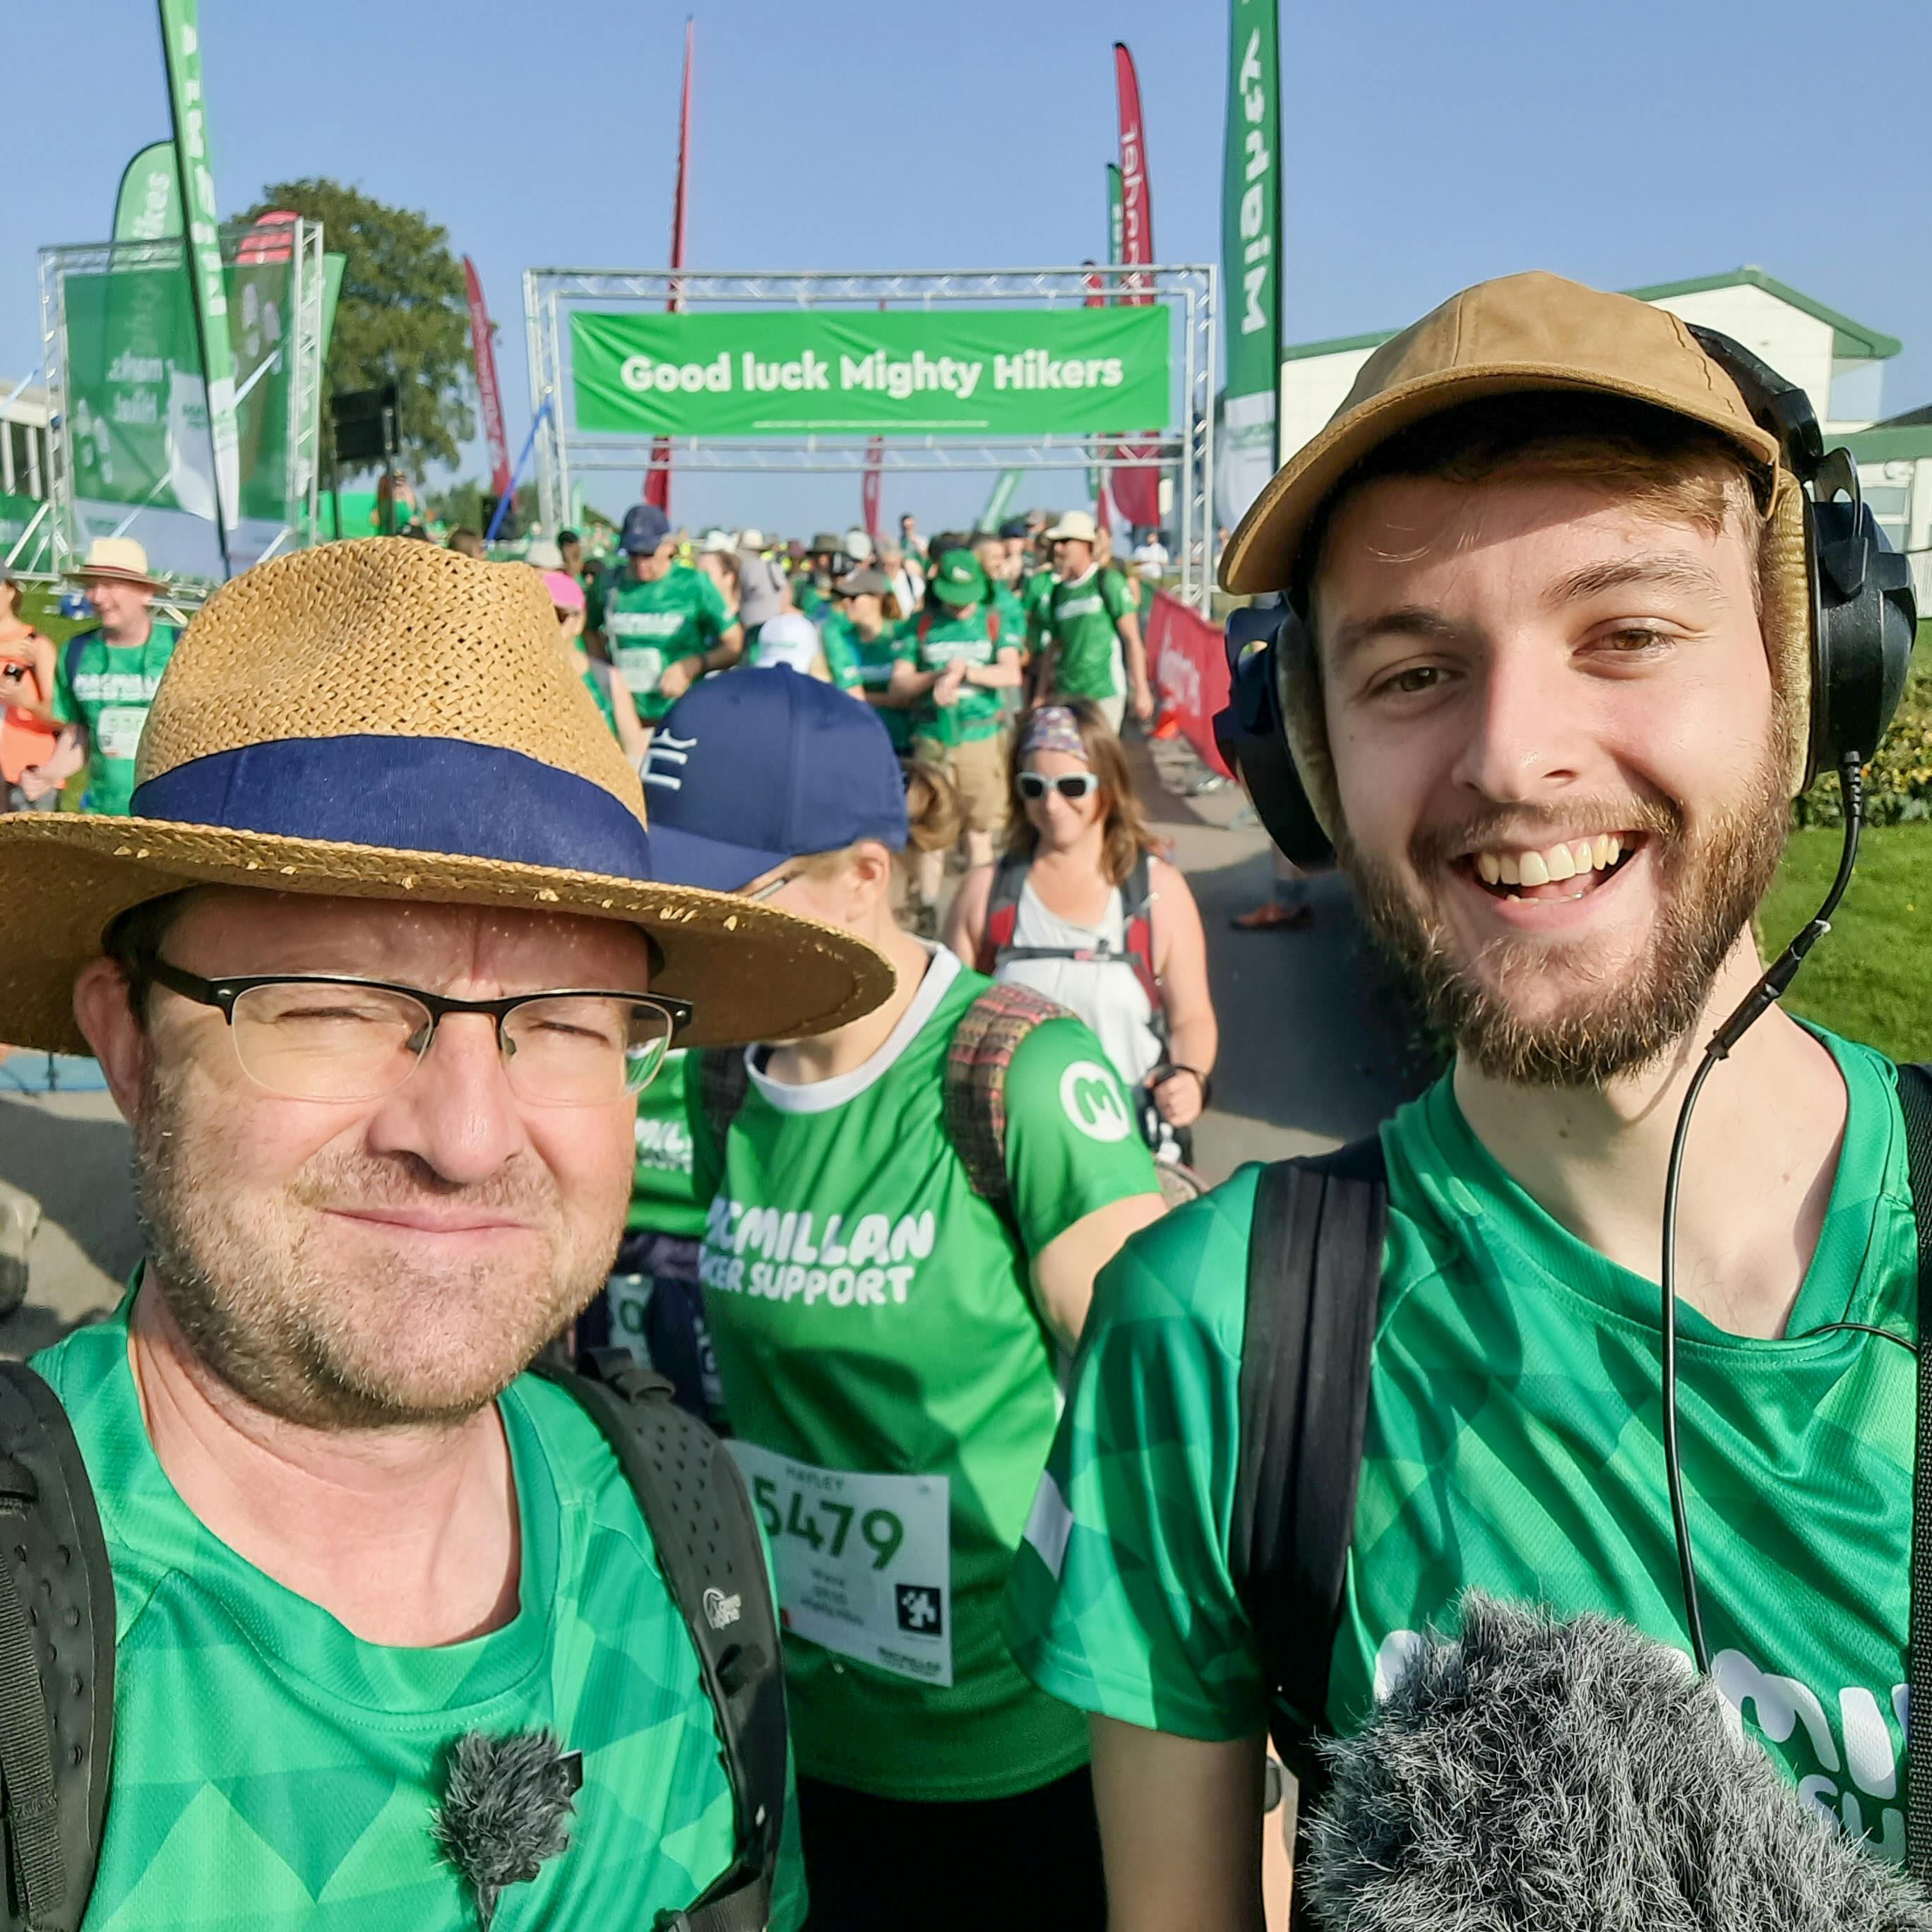 212: A charity hike through the Wye Valley – on the hottest day of the year